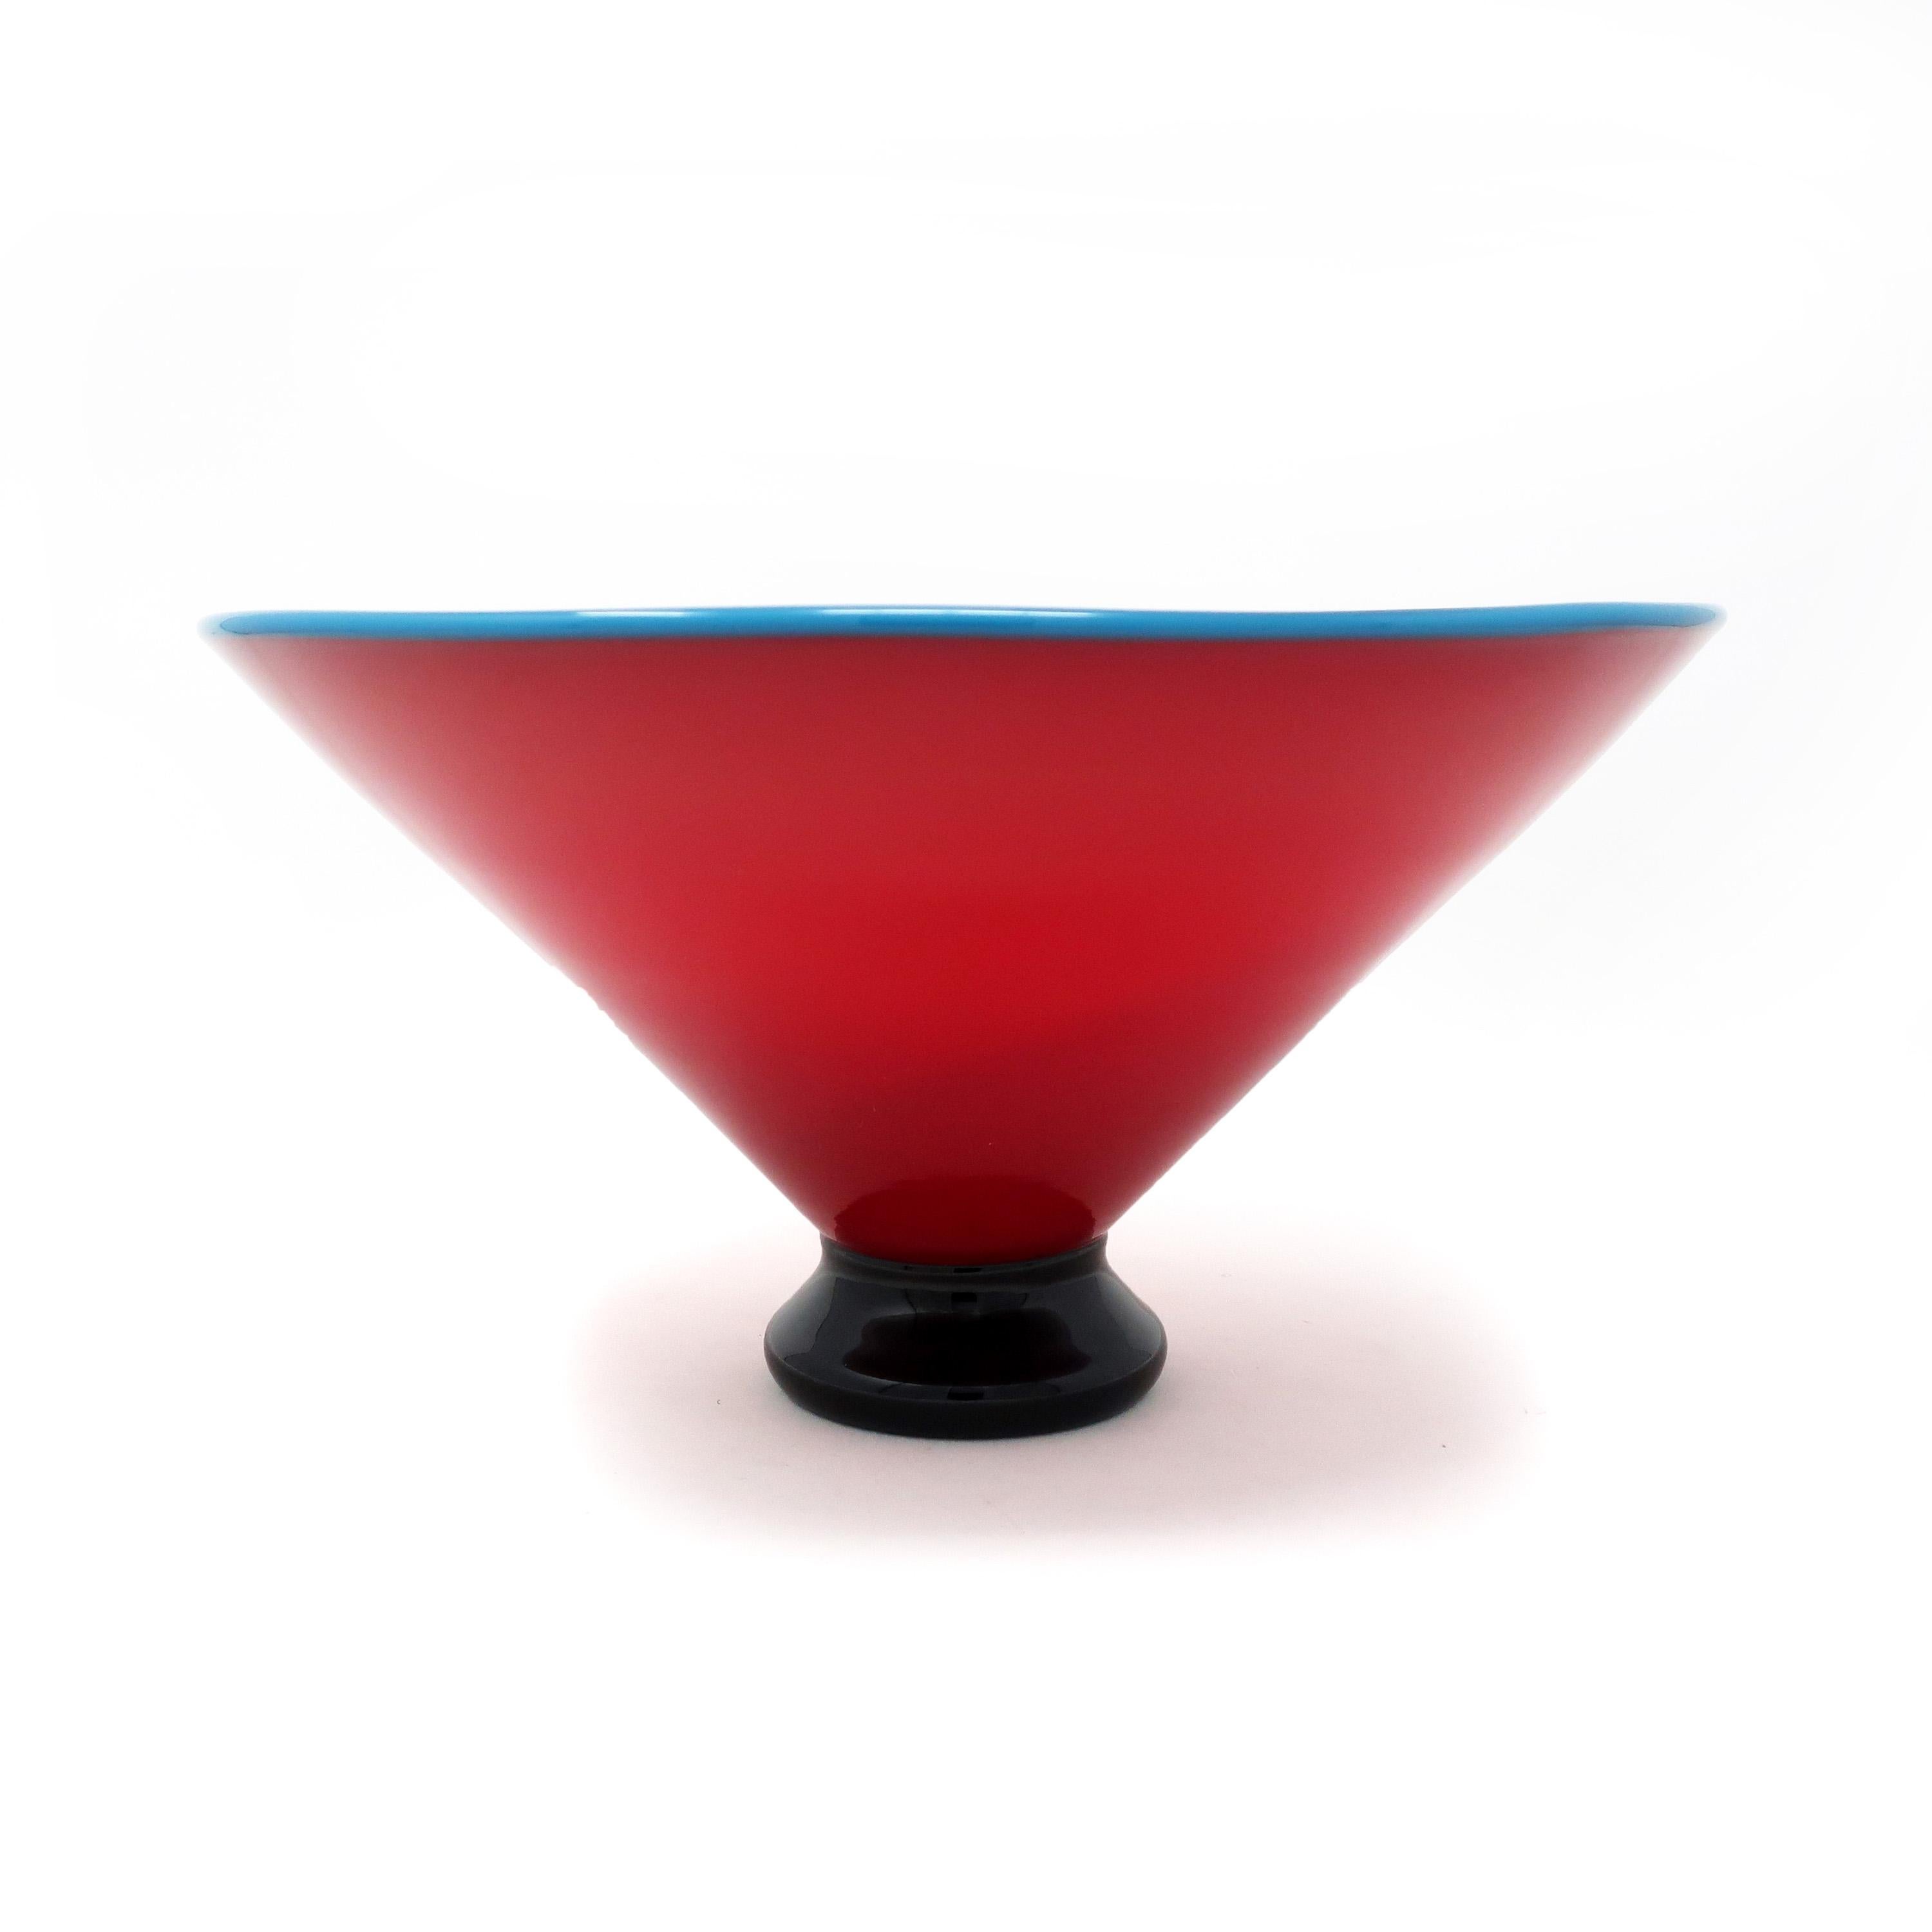 Formed in 1985 by Dimitri Michaelides, Sam Stang and David Levi, IBEX Glass Studio was heavily influenced by American studio glass pioneers, mid-century Venetian glass, and postmodern European design, including Ettore Sottsass and his Memphis